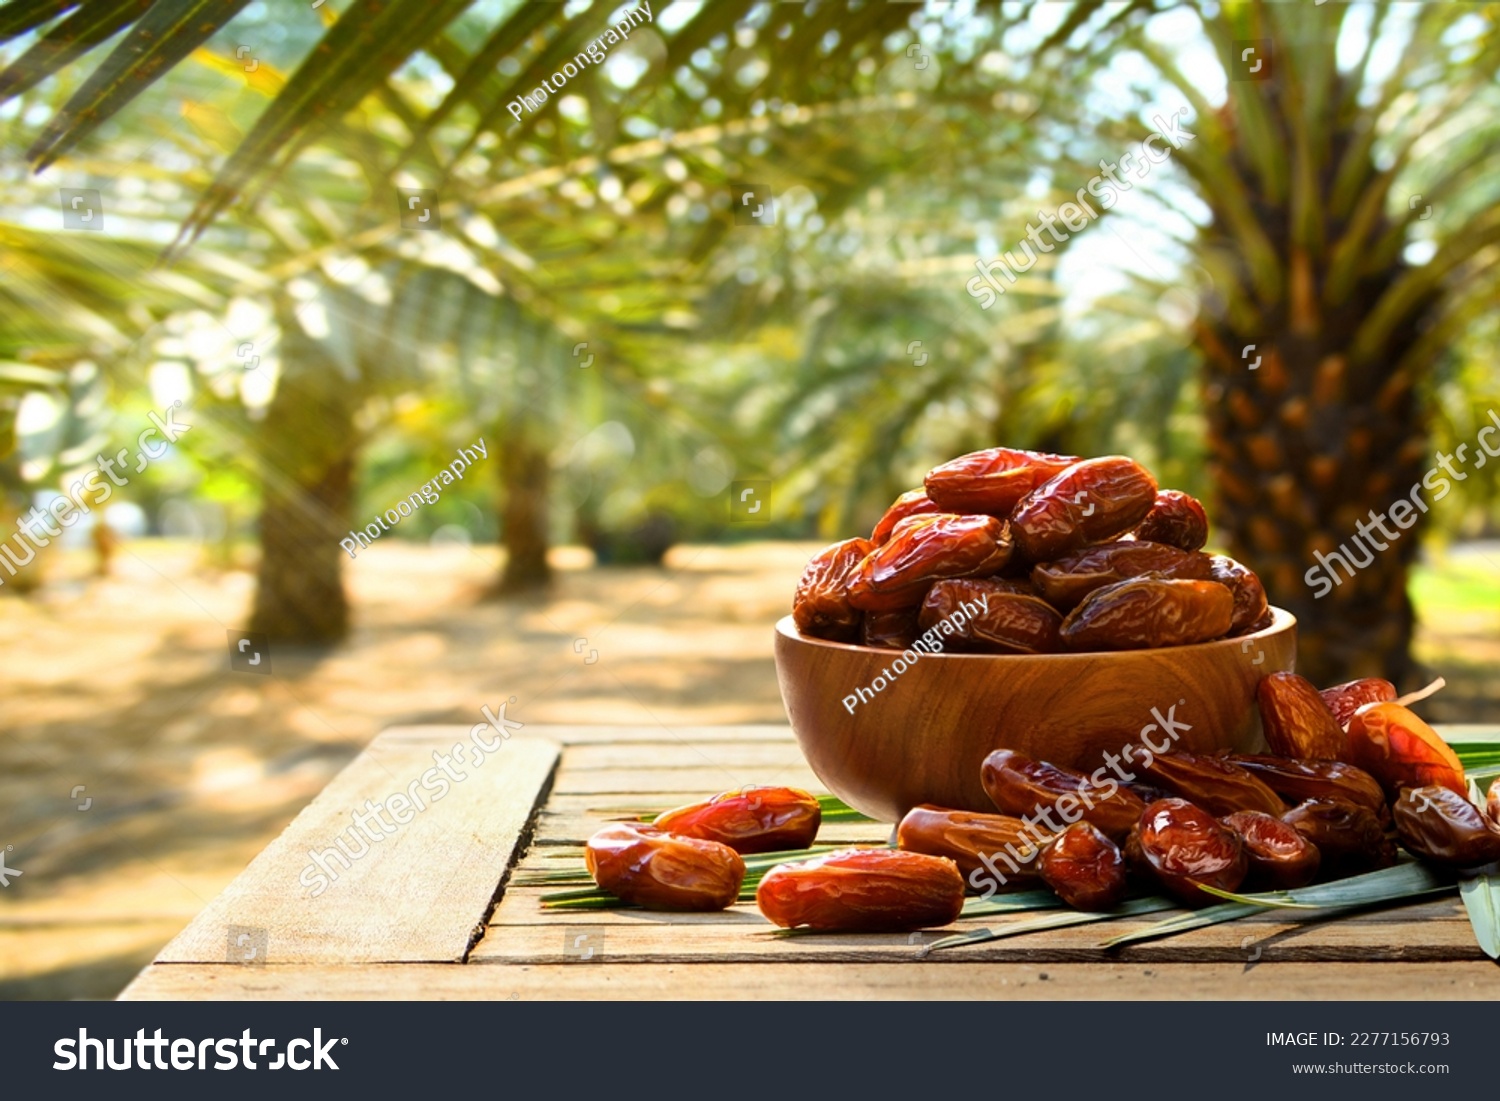 Dried dates fruits with dates palm plantation background. #2277156793